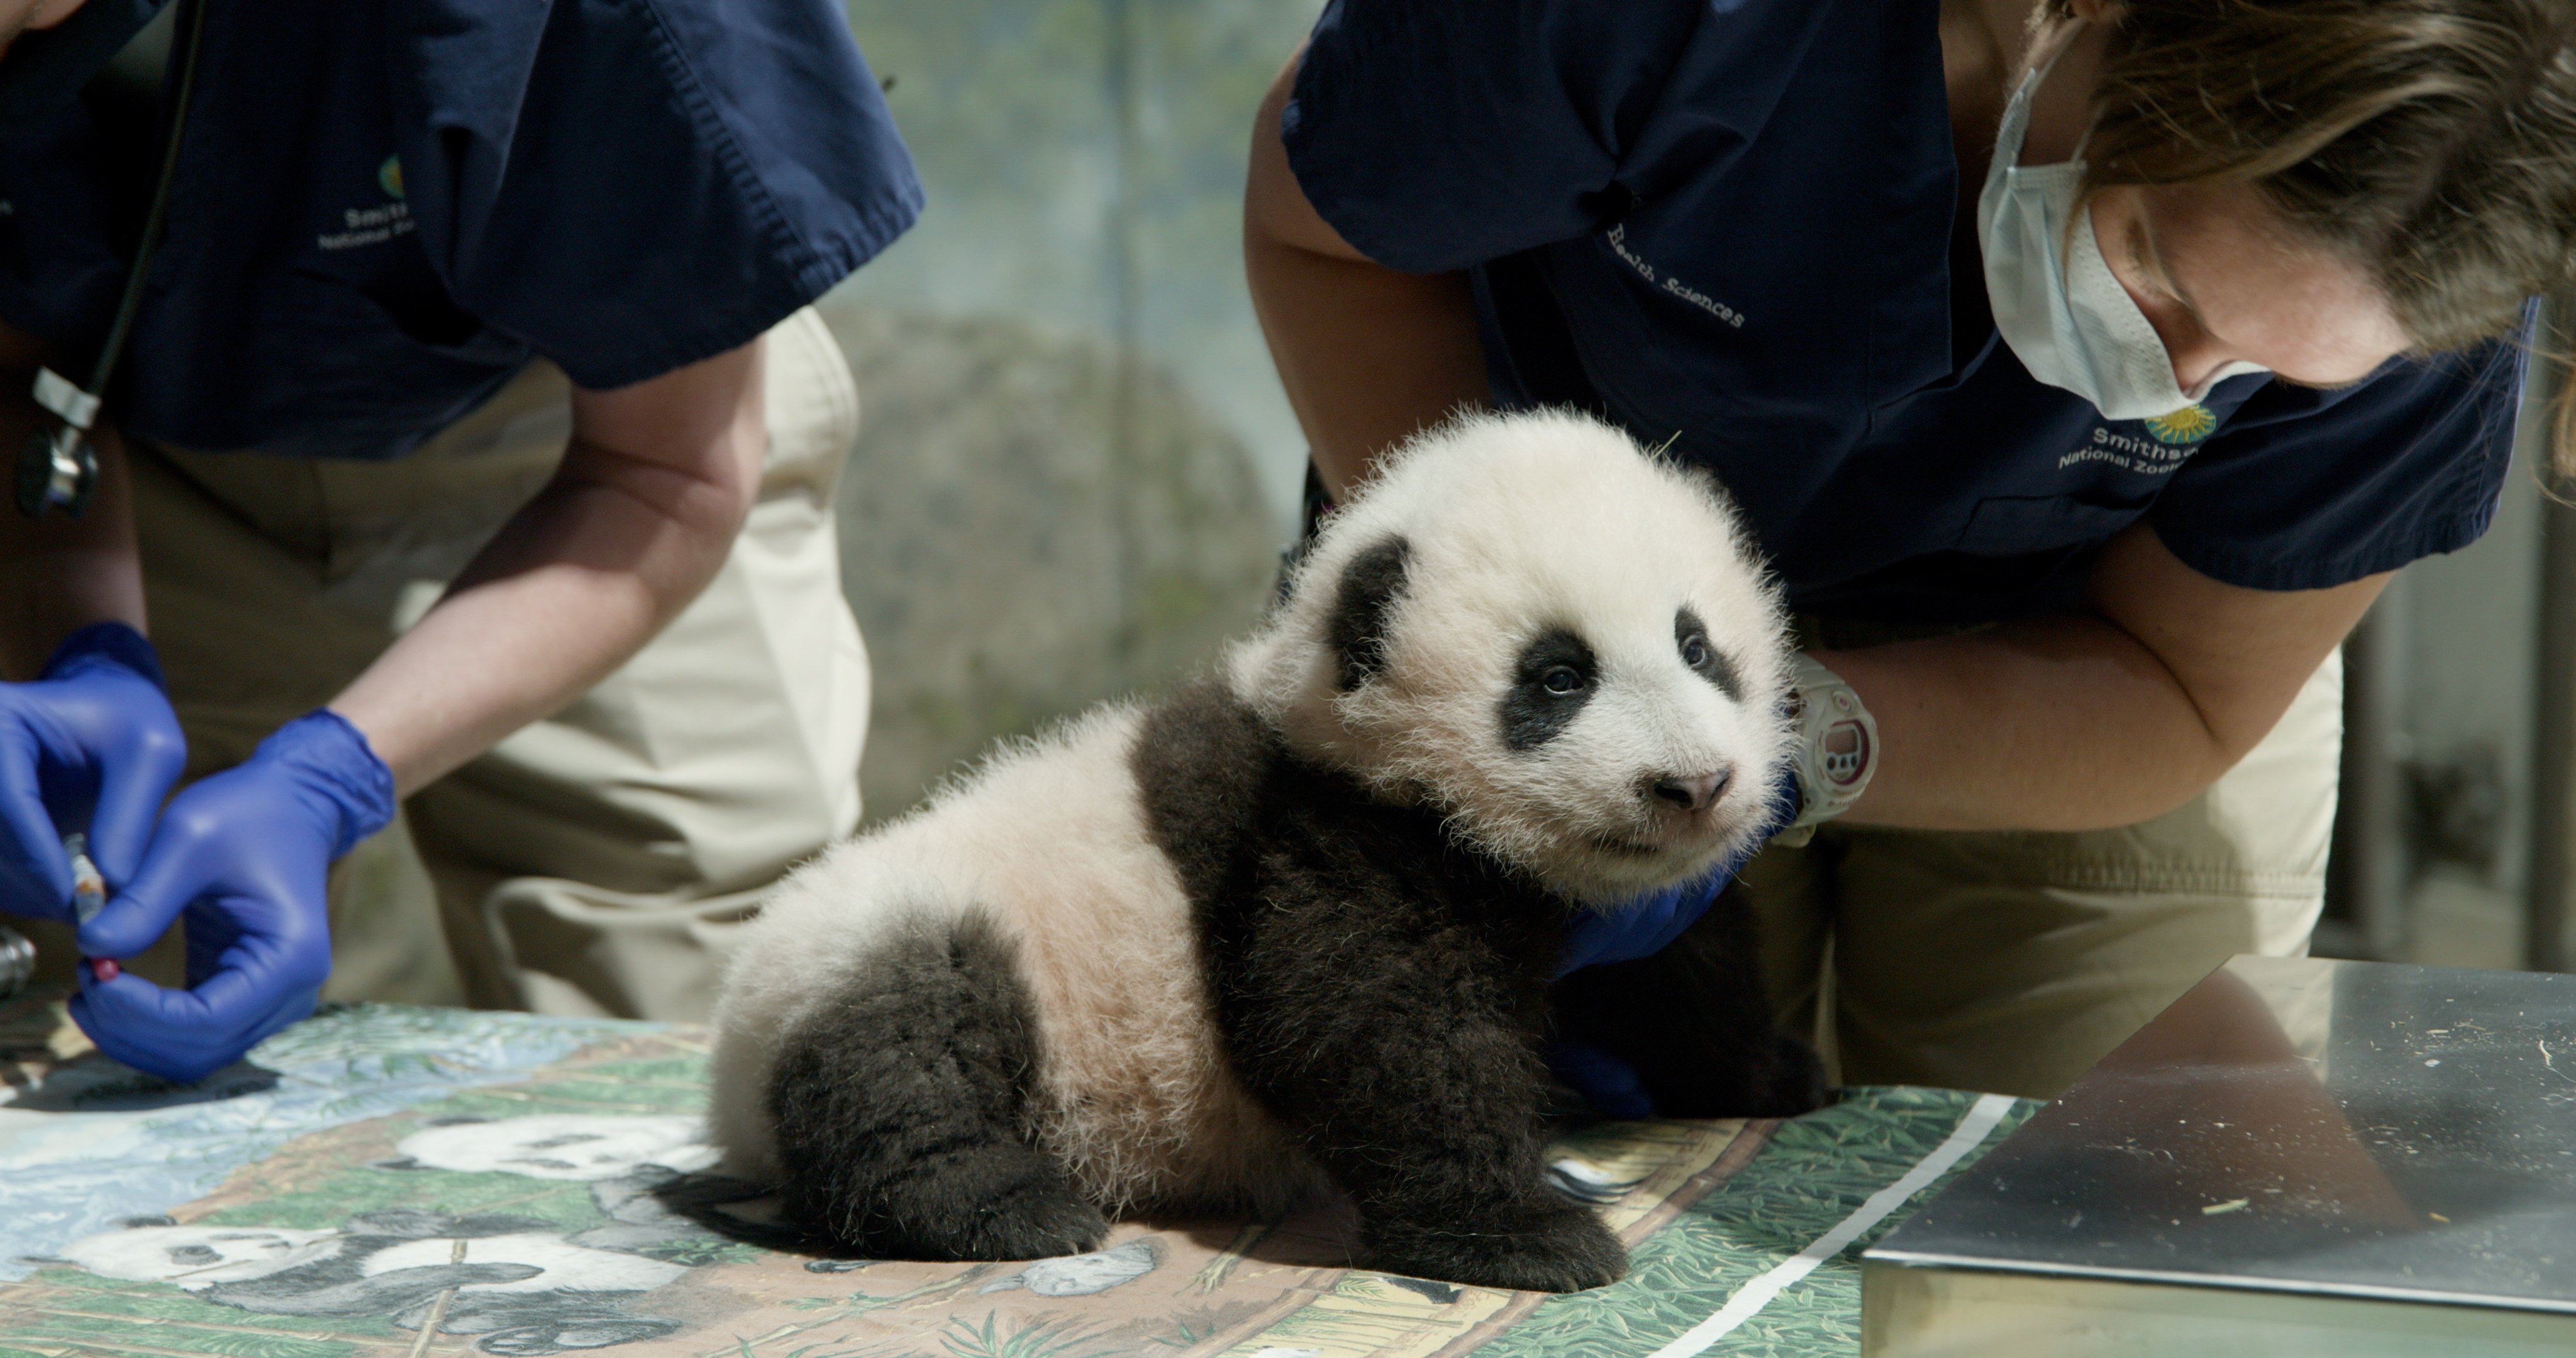 Three-month-old Xiao Qi Ji, or Little Miracle, gets a checkup in November 2020. The giant panda was born via artificial insemination during the pandemic. More than a million watched his live-streamed birth take place at the Smithsonian’s National Zoo in Washington. Photo: Handout via Xinhua